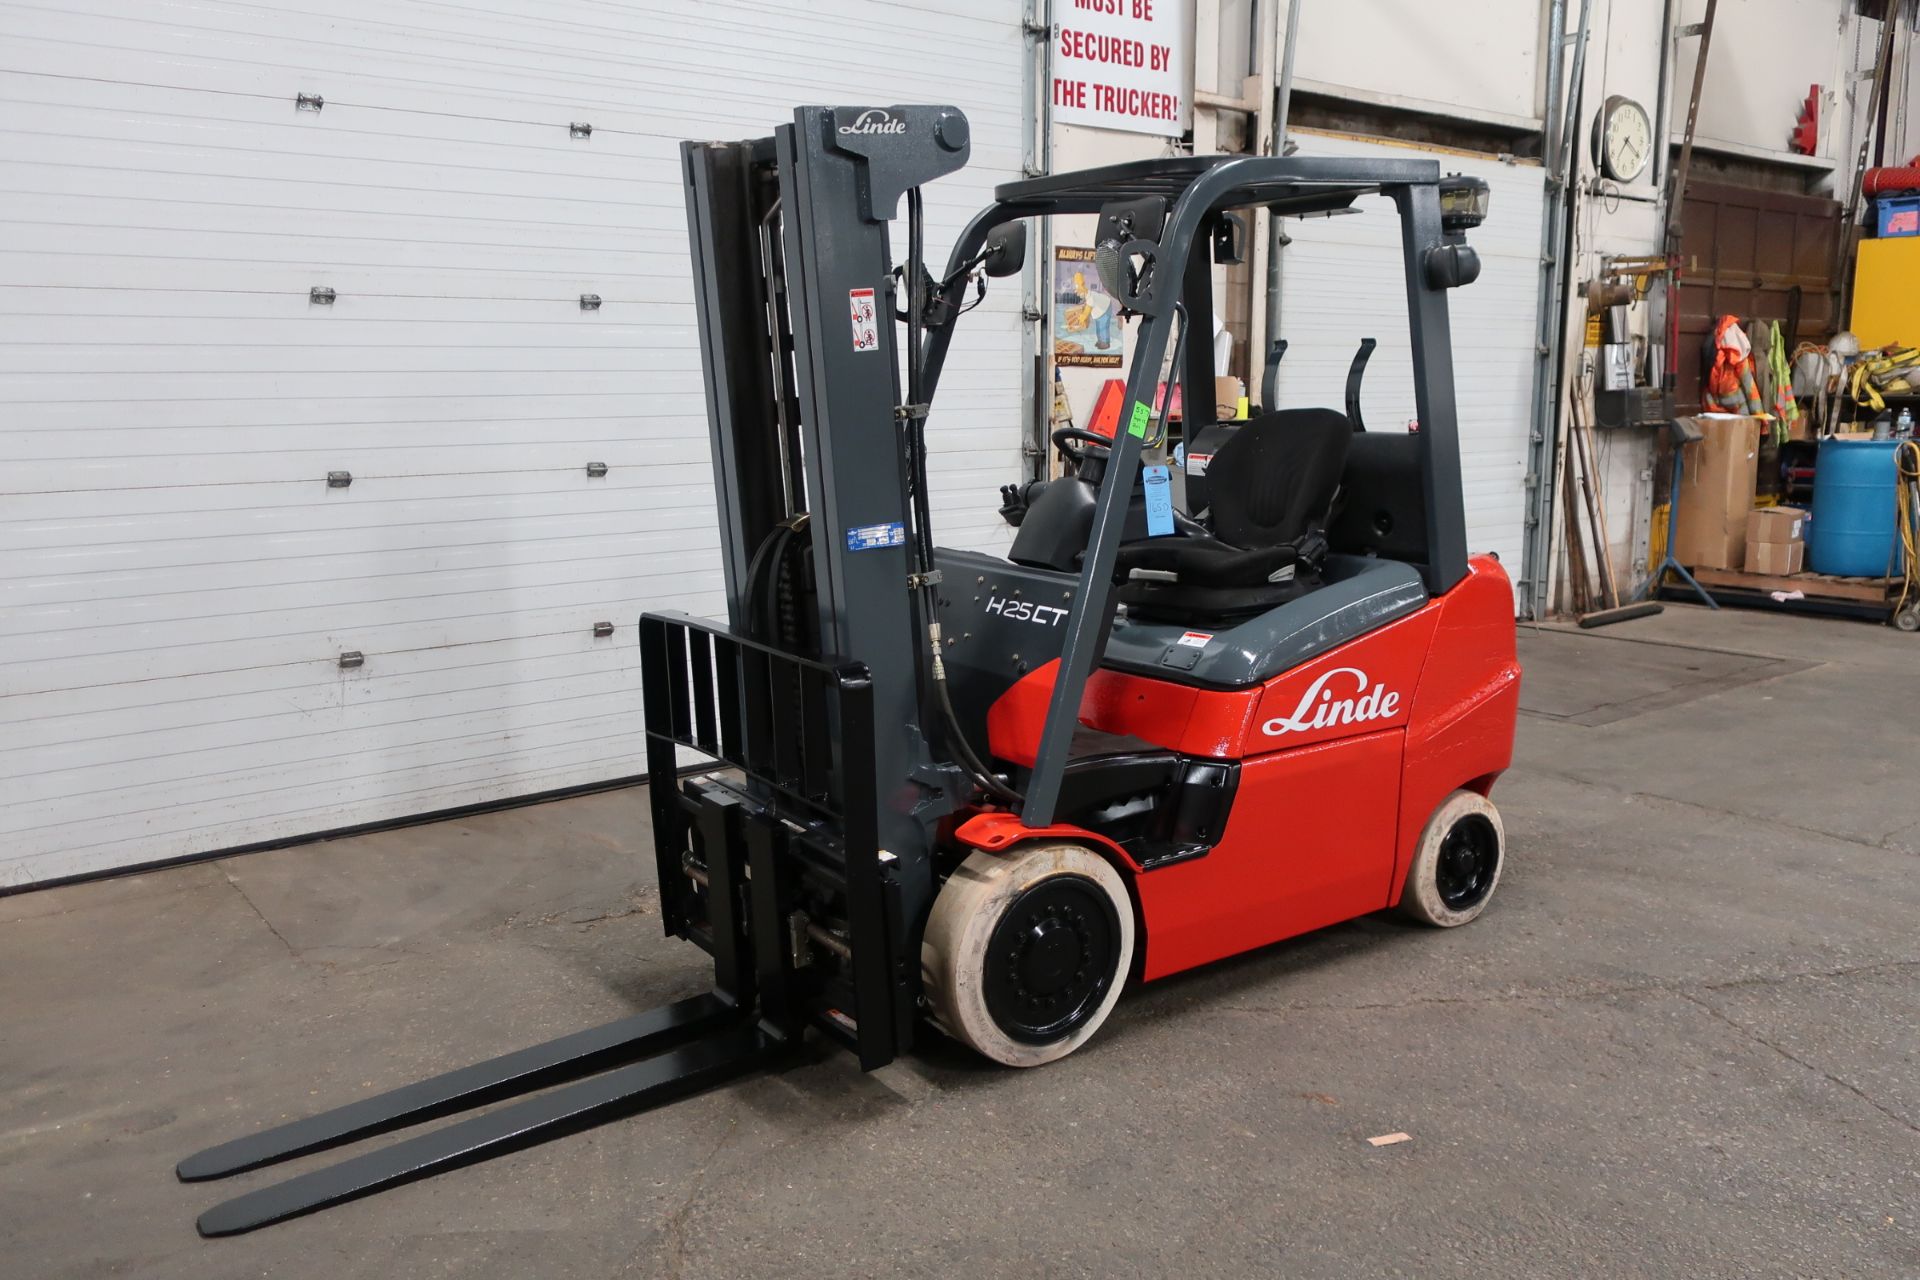 FREE CUSTOMS DOCS & 0 DUTY FEES - 2014 Linde 4700lbs Capacity Forklift with sideshift - LPG